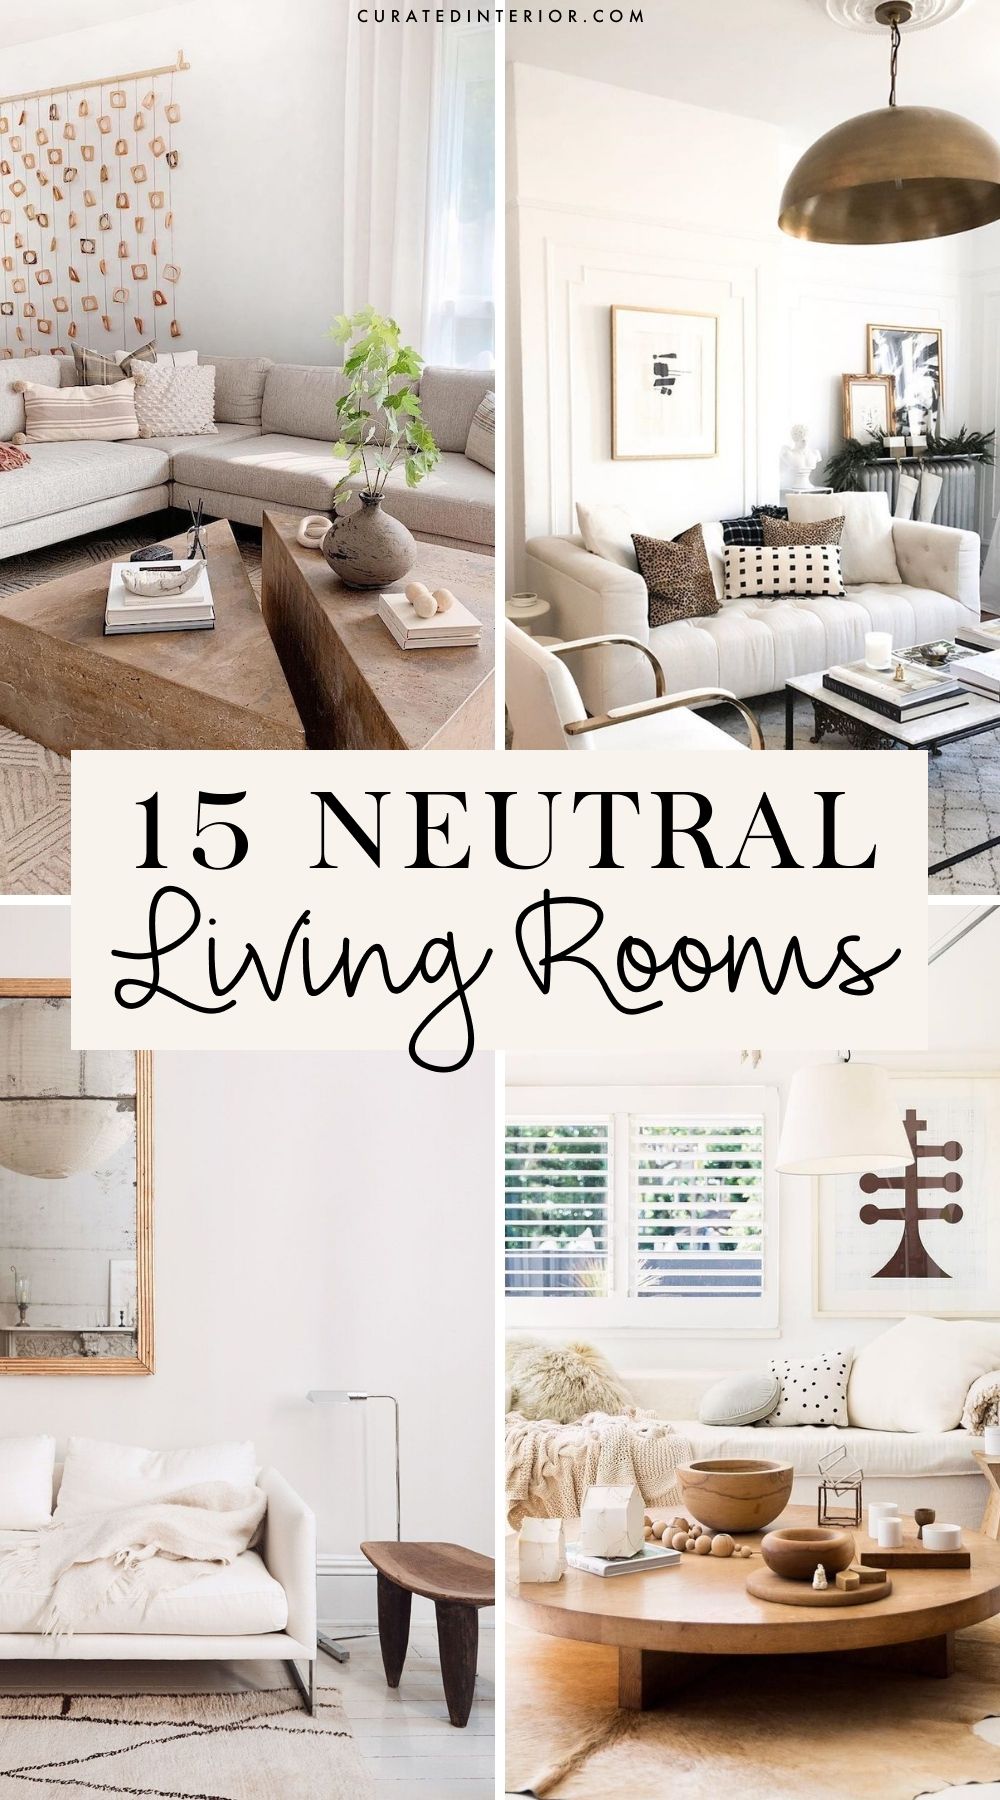 15 Neutral Living Rooms You MUST See!